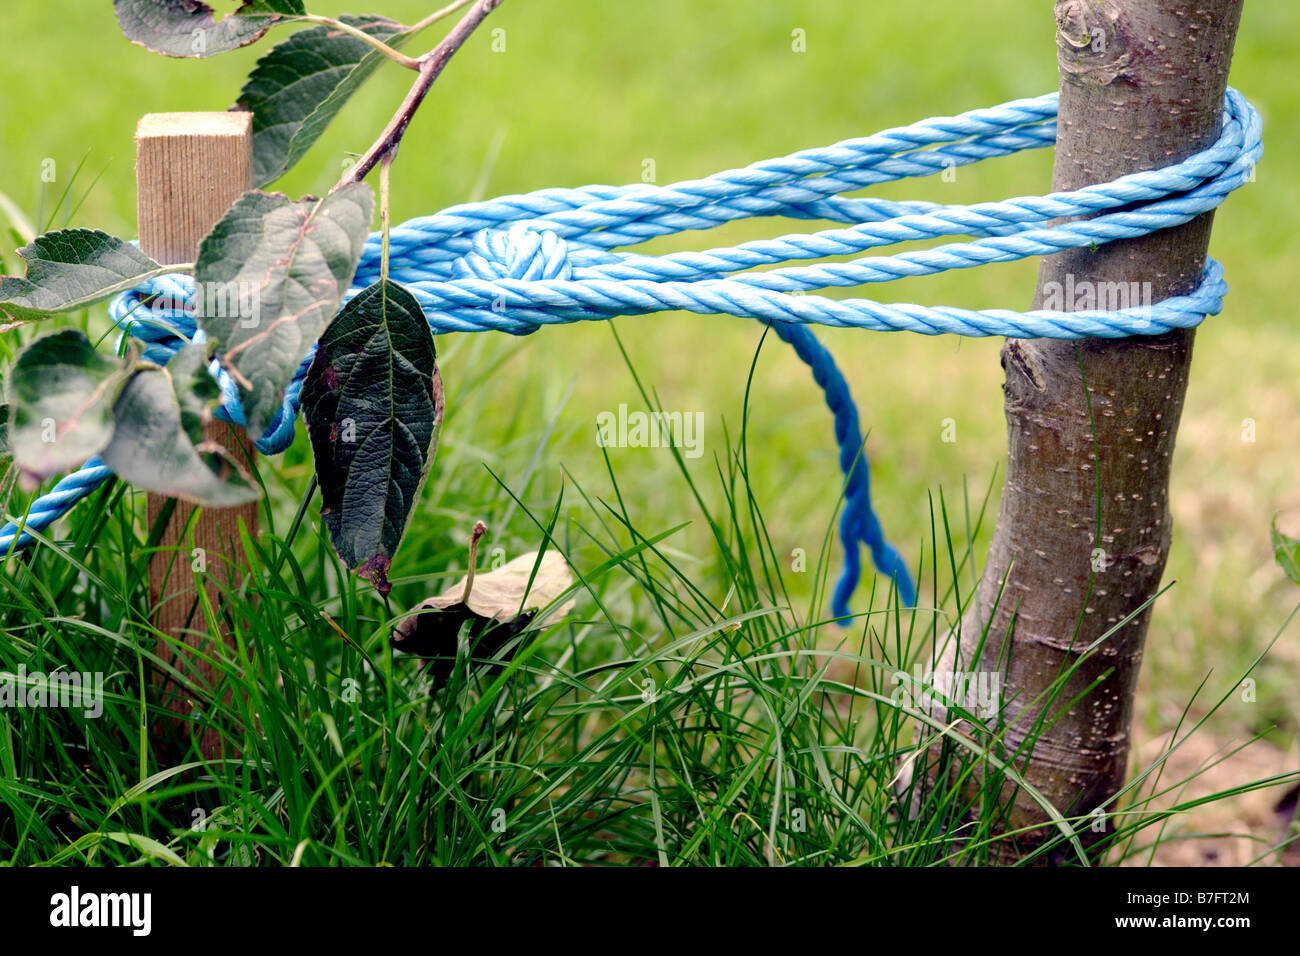 Stake and rope supporting young apple tree, England, UK Stock Photo